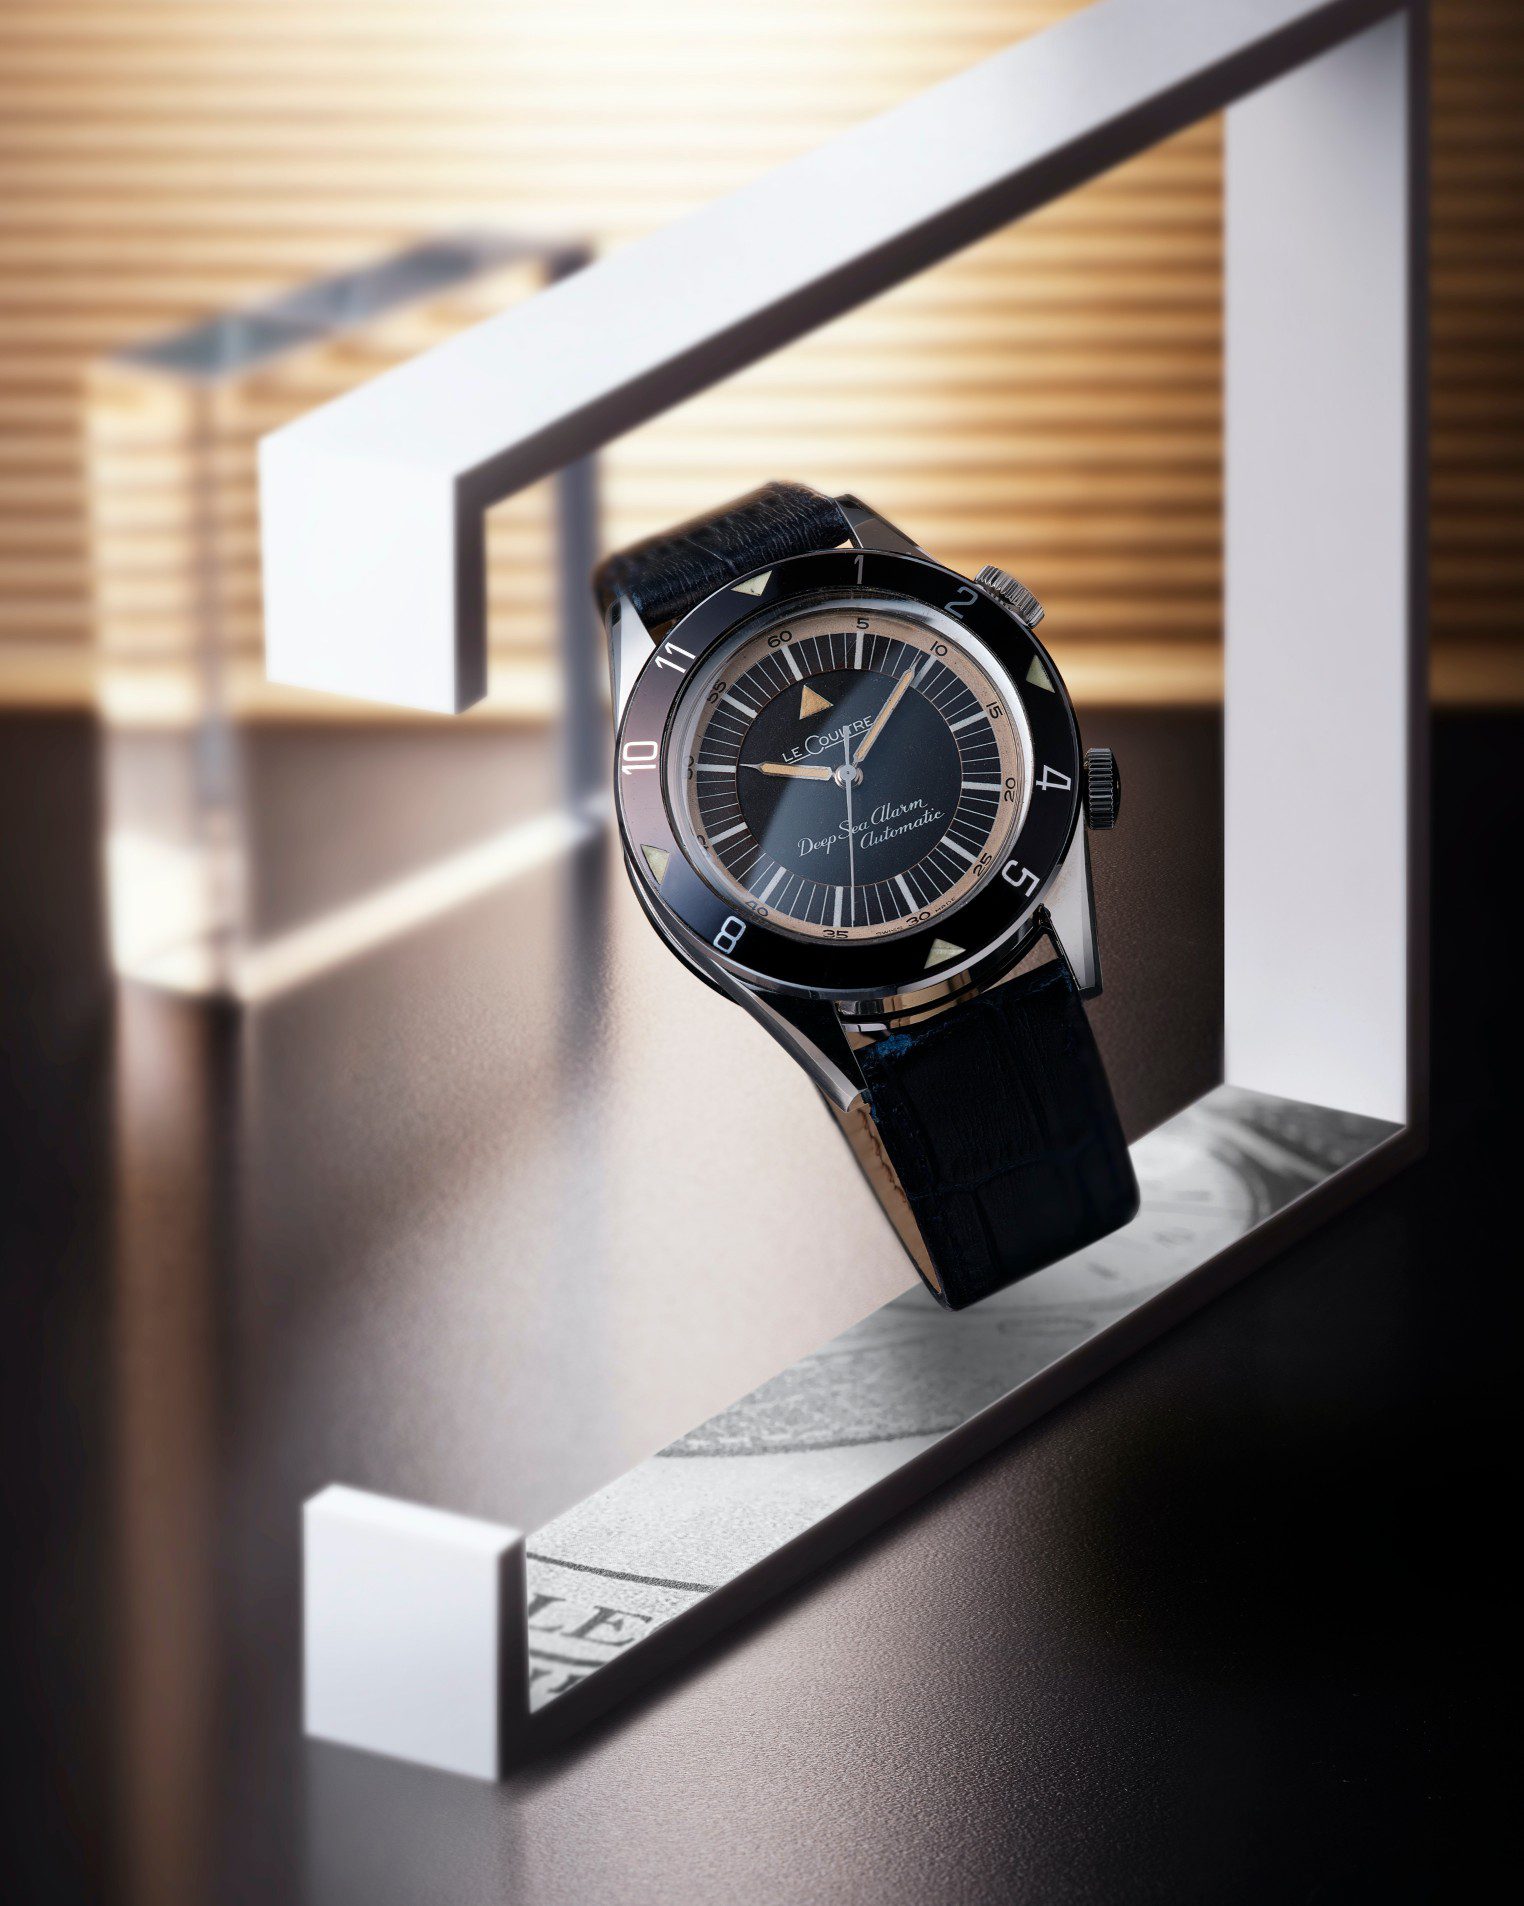 Jaeger Lecoultre Watches The Sound Of Music